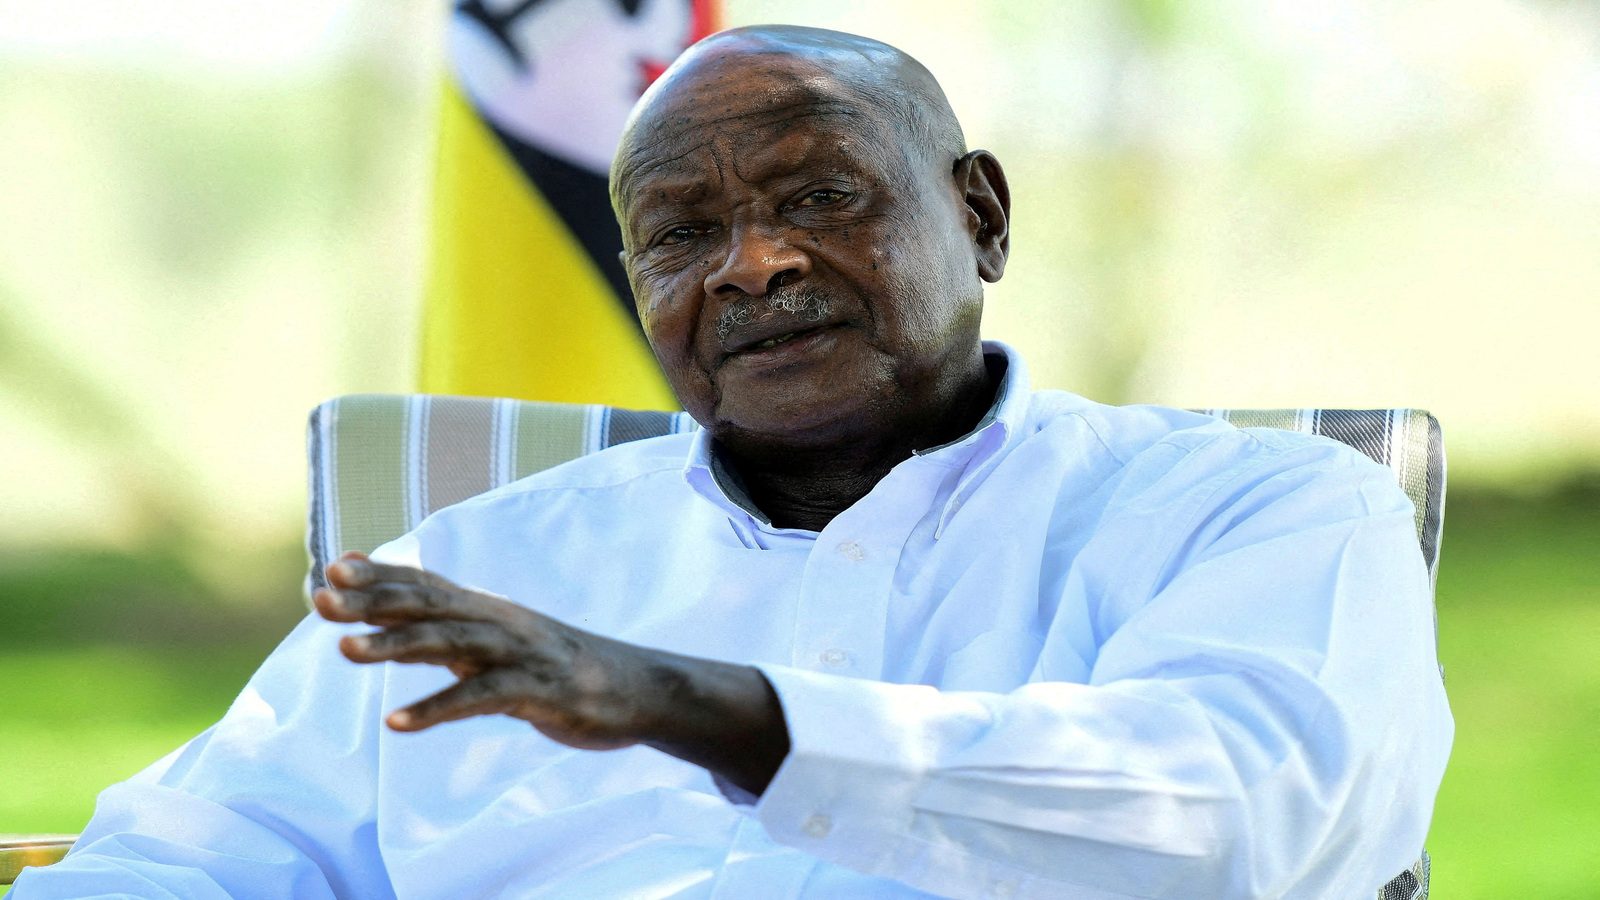 FILE PHOTO: Uganda's President Yoweri Museveni speaks during a Reuters interview at his farm in Kisozi settlement of Gomba district, in the Central Region of Uganda, January 16, 2022. REUTERS/Abubaker Lubowa